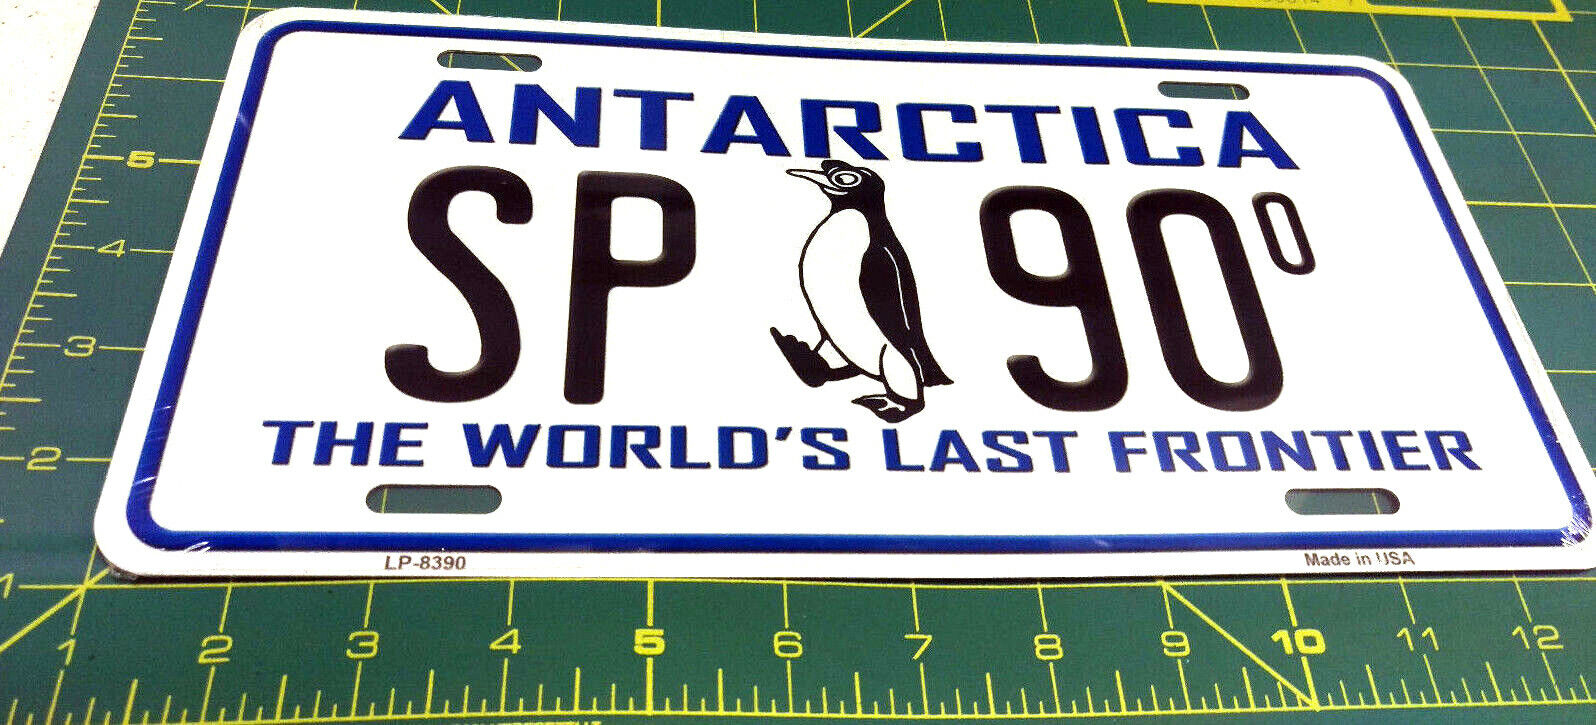  Antarctica 12x6 Metal License Plate - The worlds last frontier  SP 90, USA made